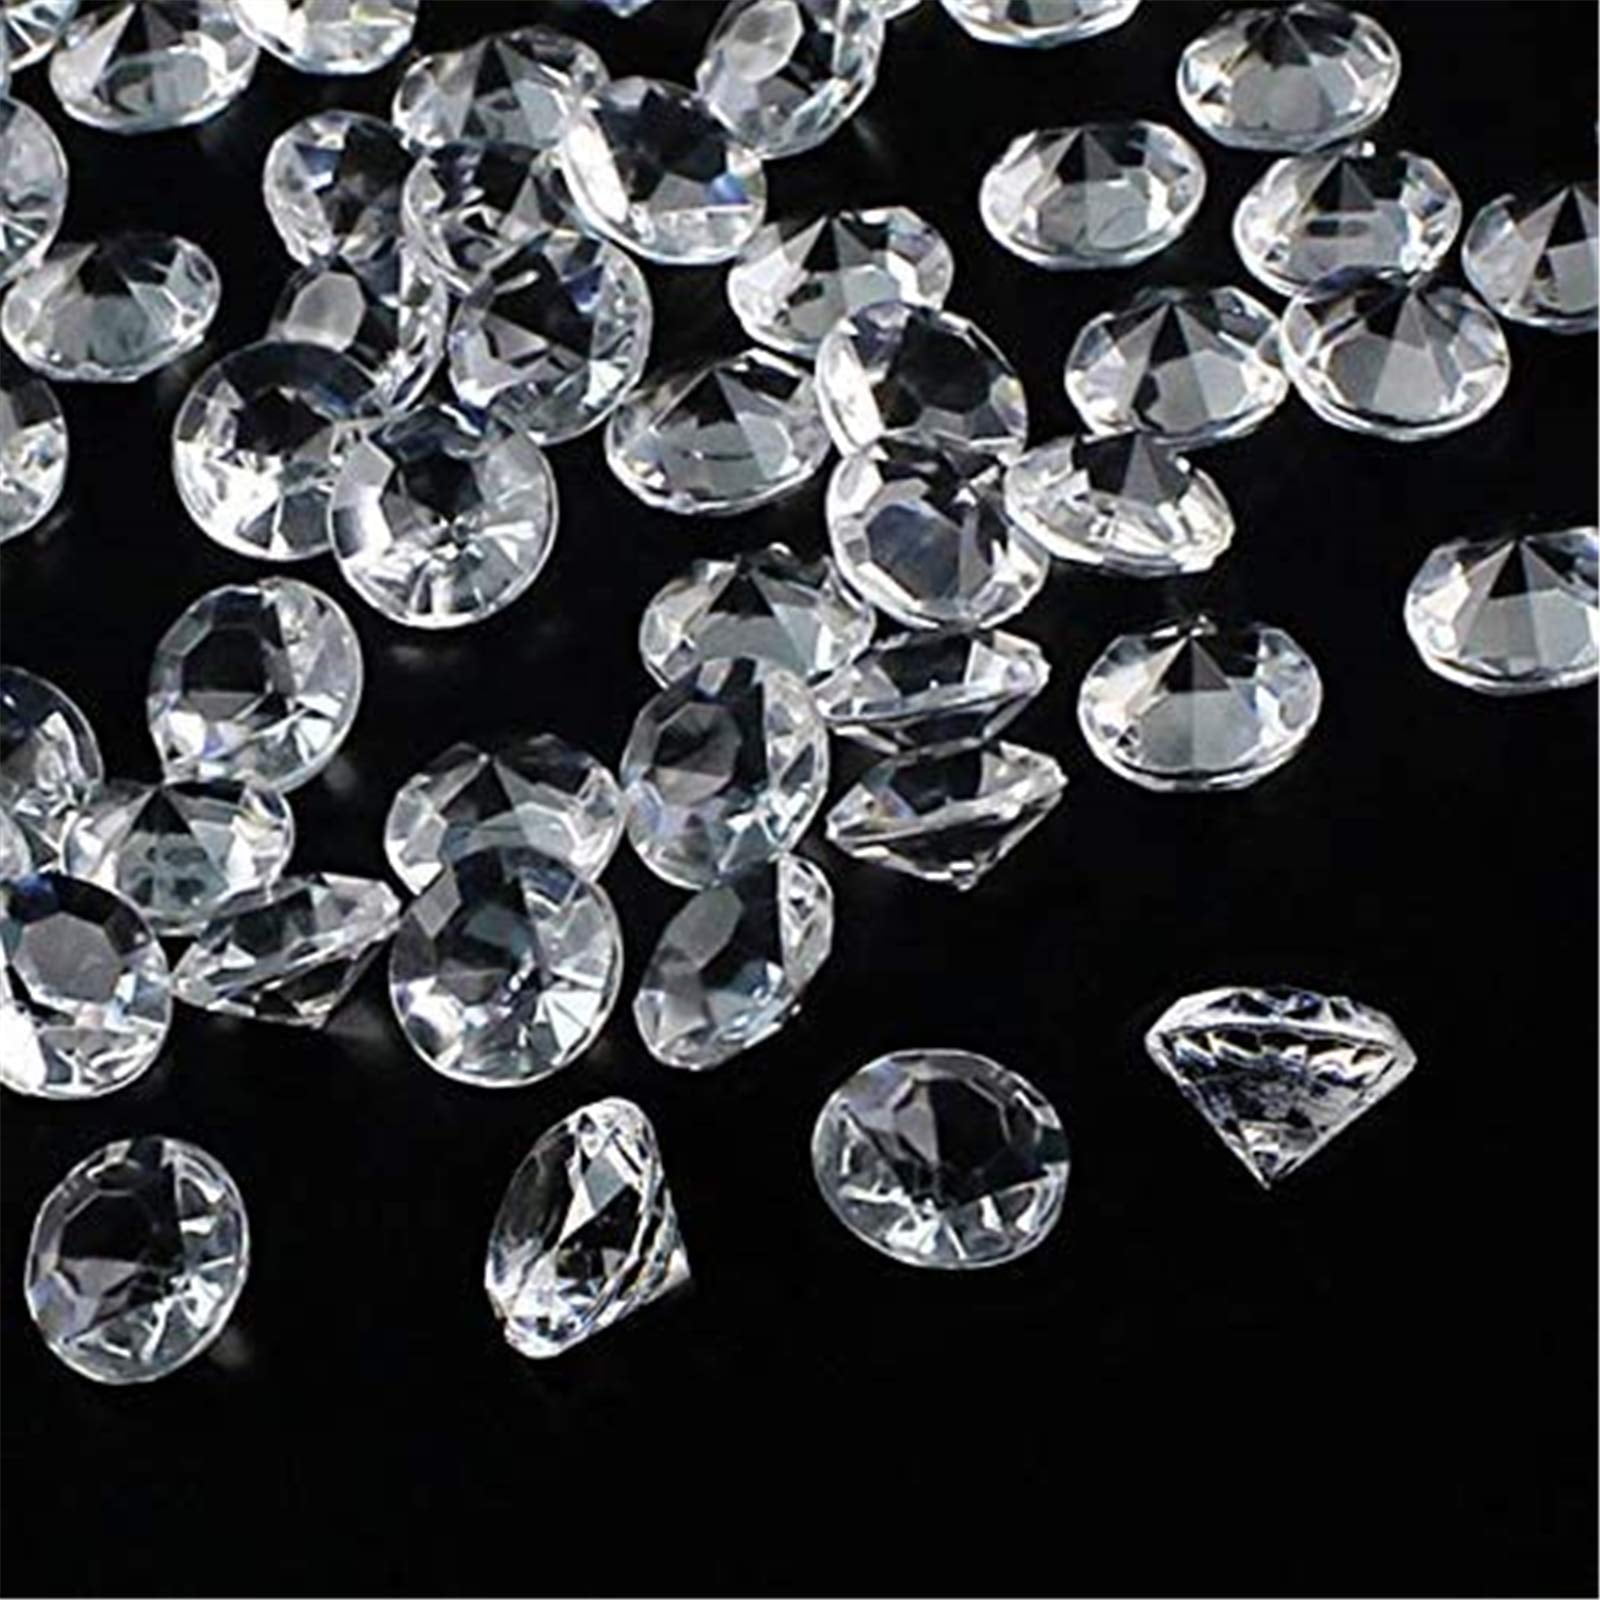 OUTUXED 300pcs 20mm Clear Wedding Table Scattering Crystals Acrylic Diamonds Gemstones Wedding Bridal Shower Party Decorations Vase Fillers 1.5 LB with 1 Large Velvet Pouch